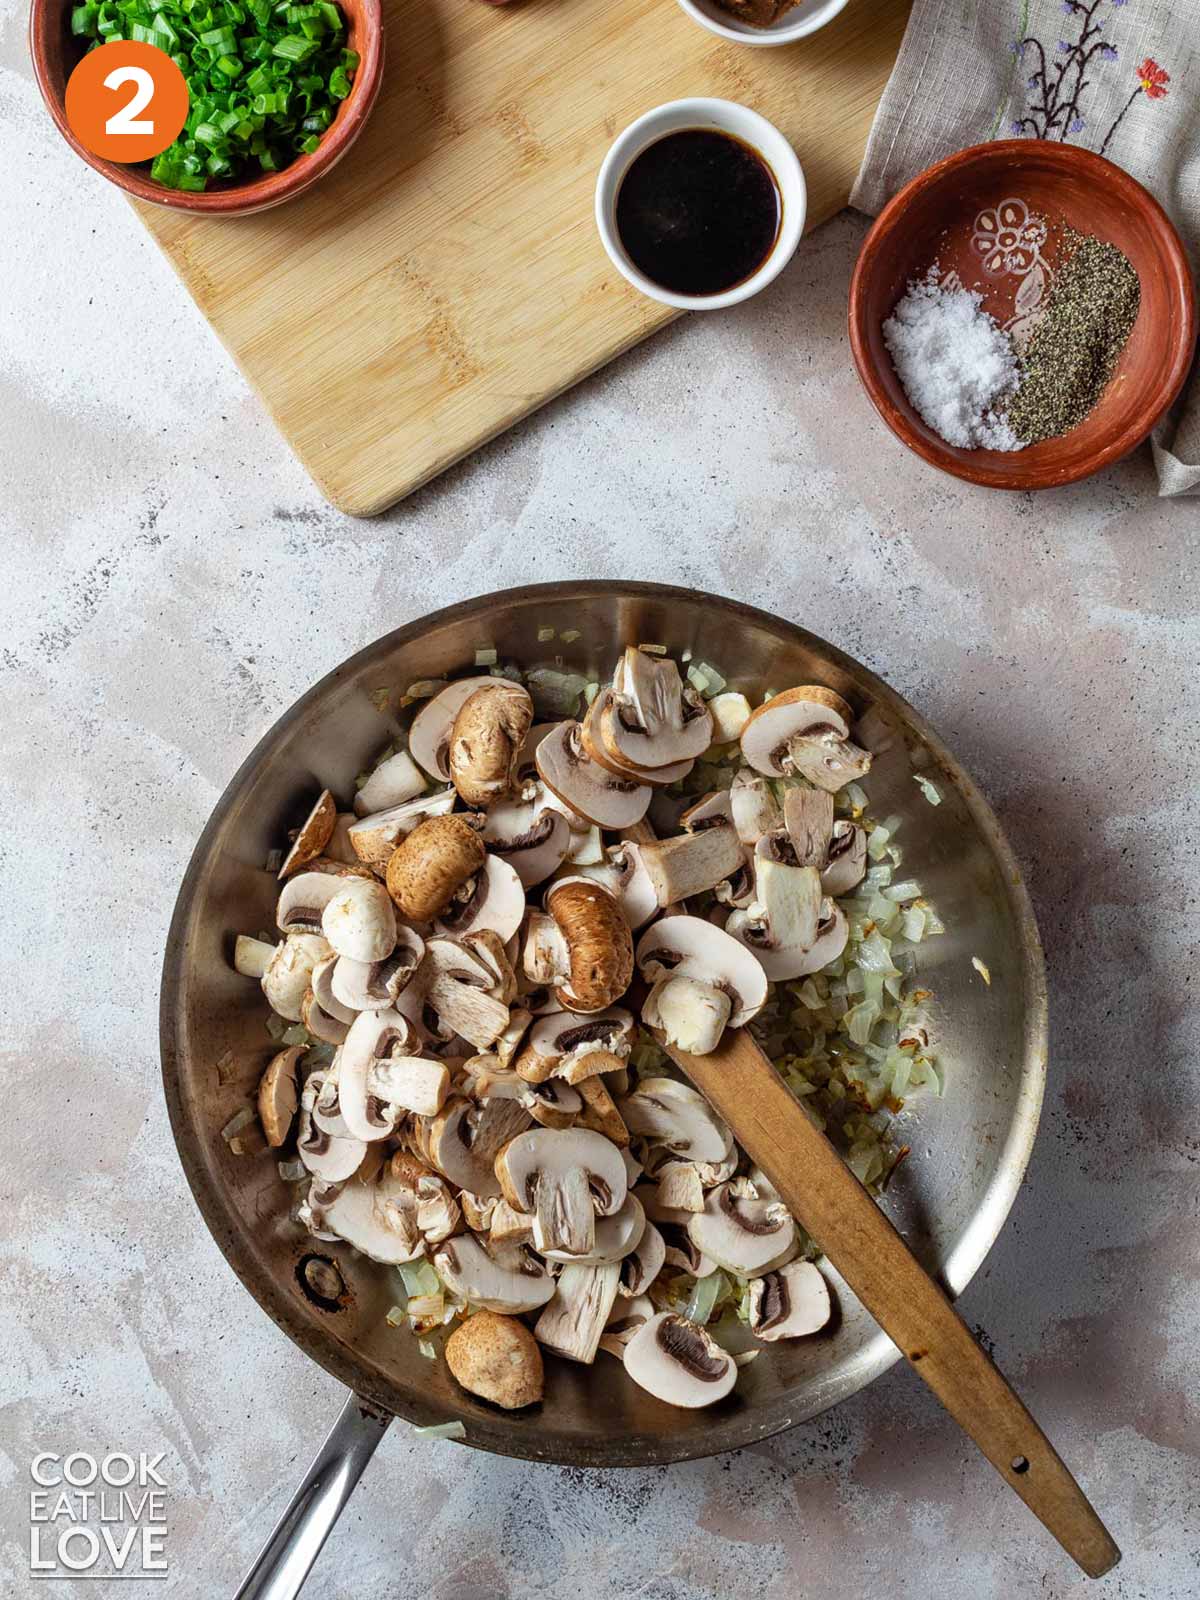 Mushrooms added to the skillet of cooked onions.